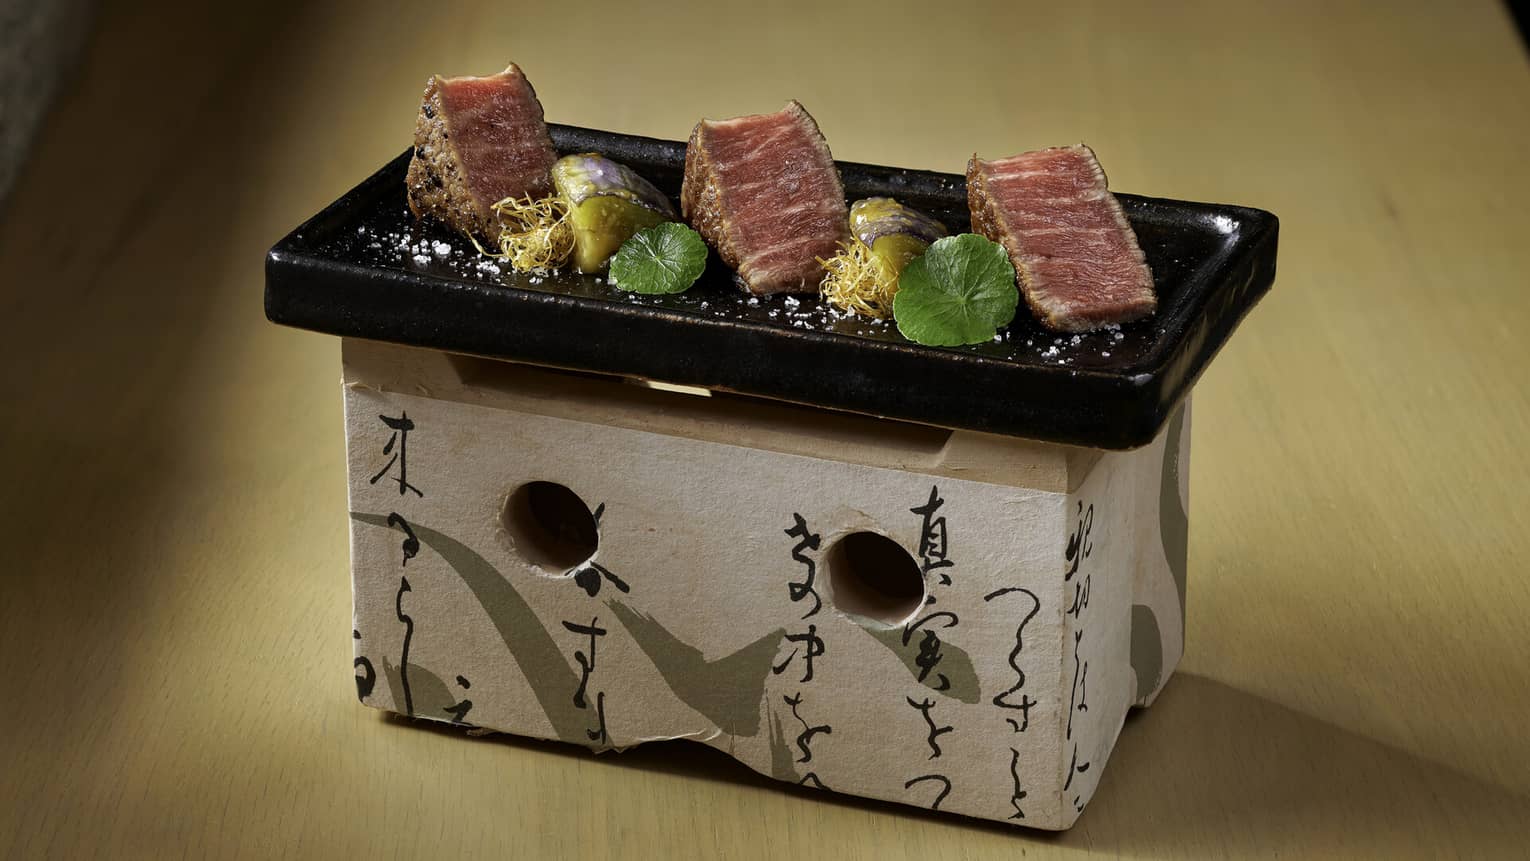 Cubes of rare A5 beef on Japanese stone